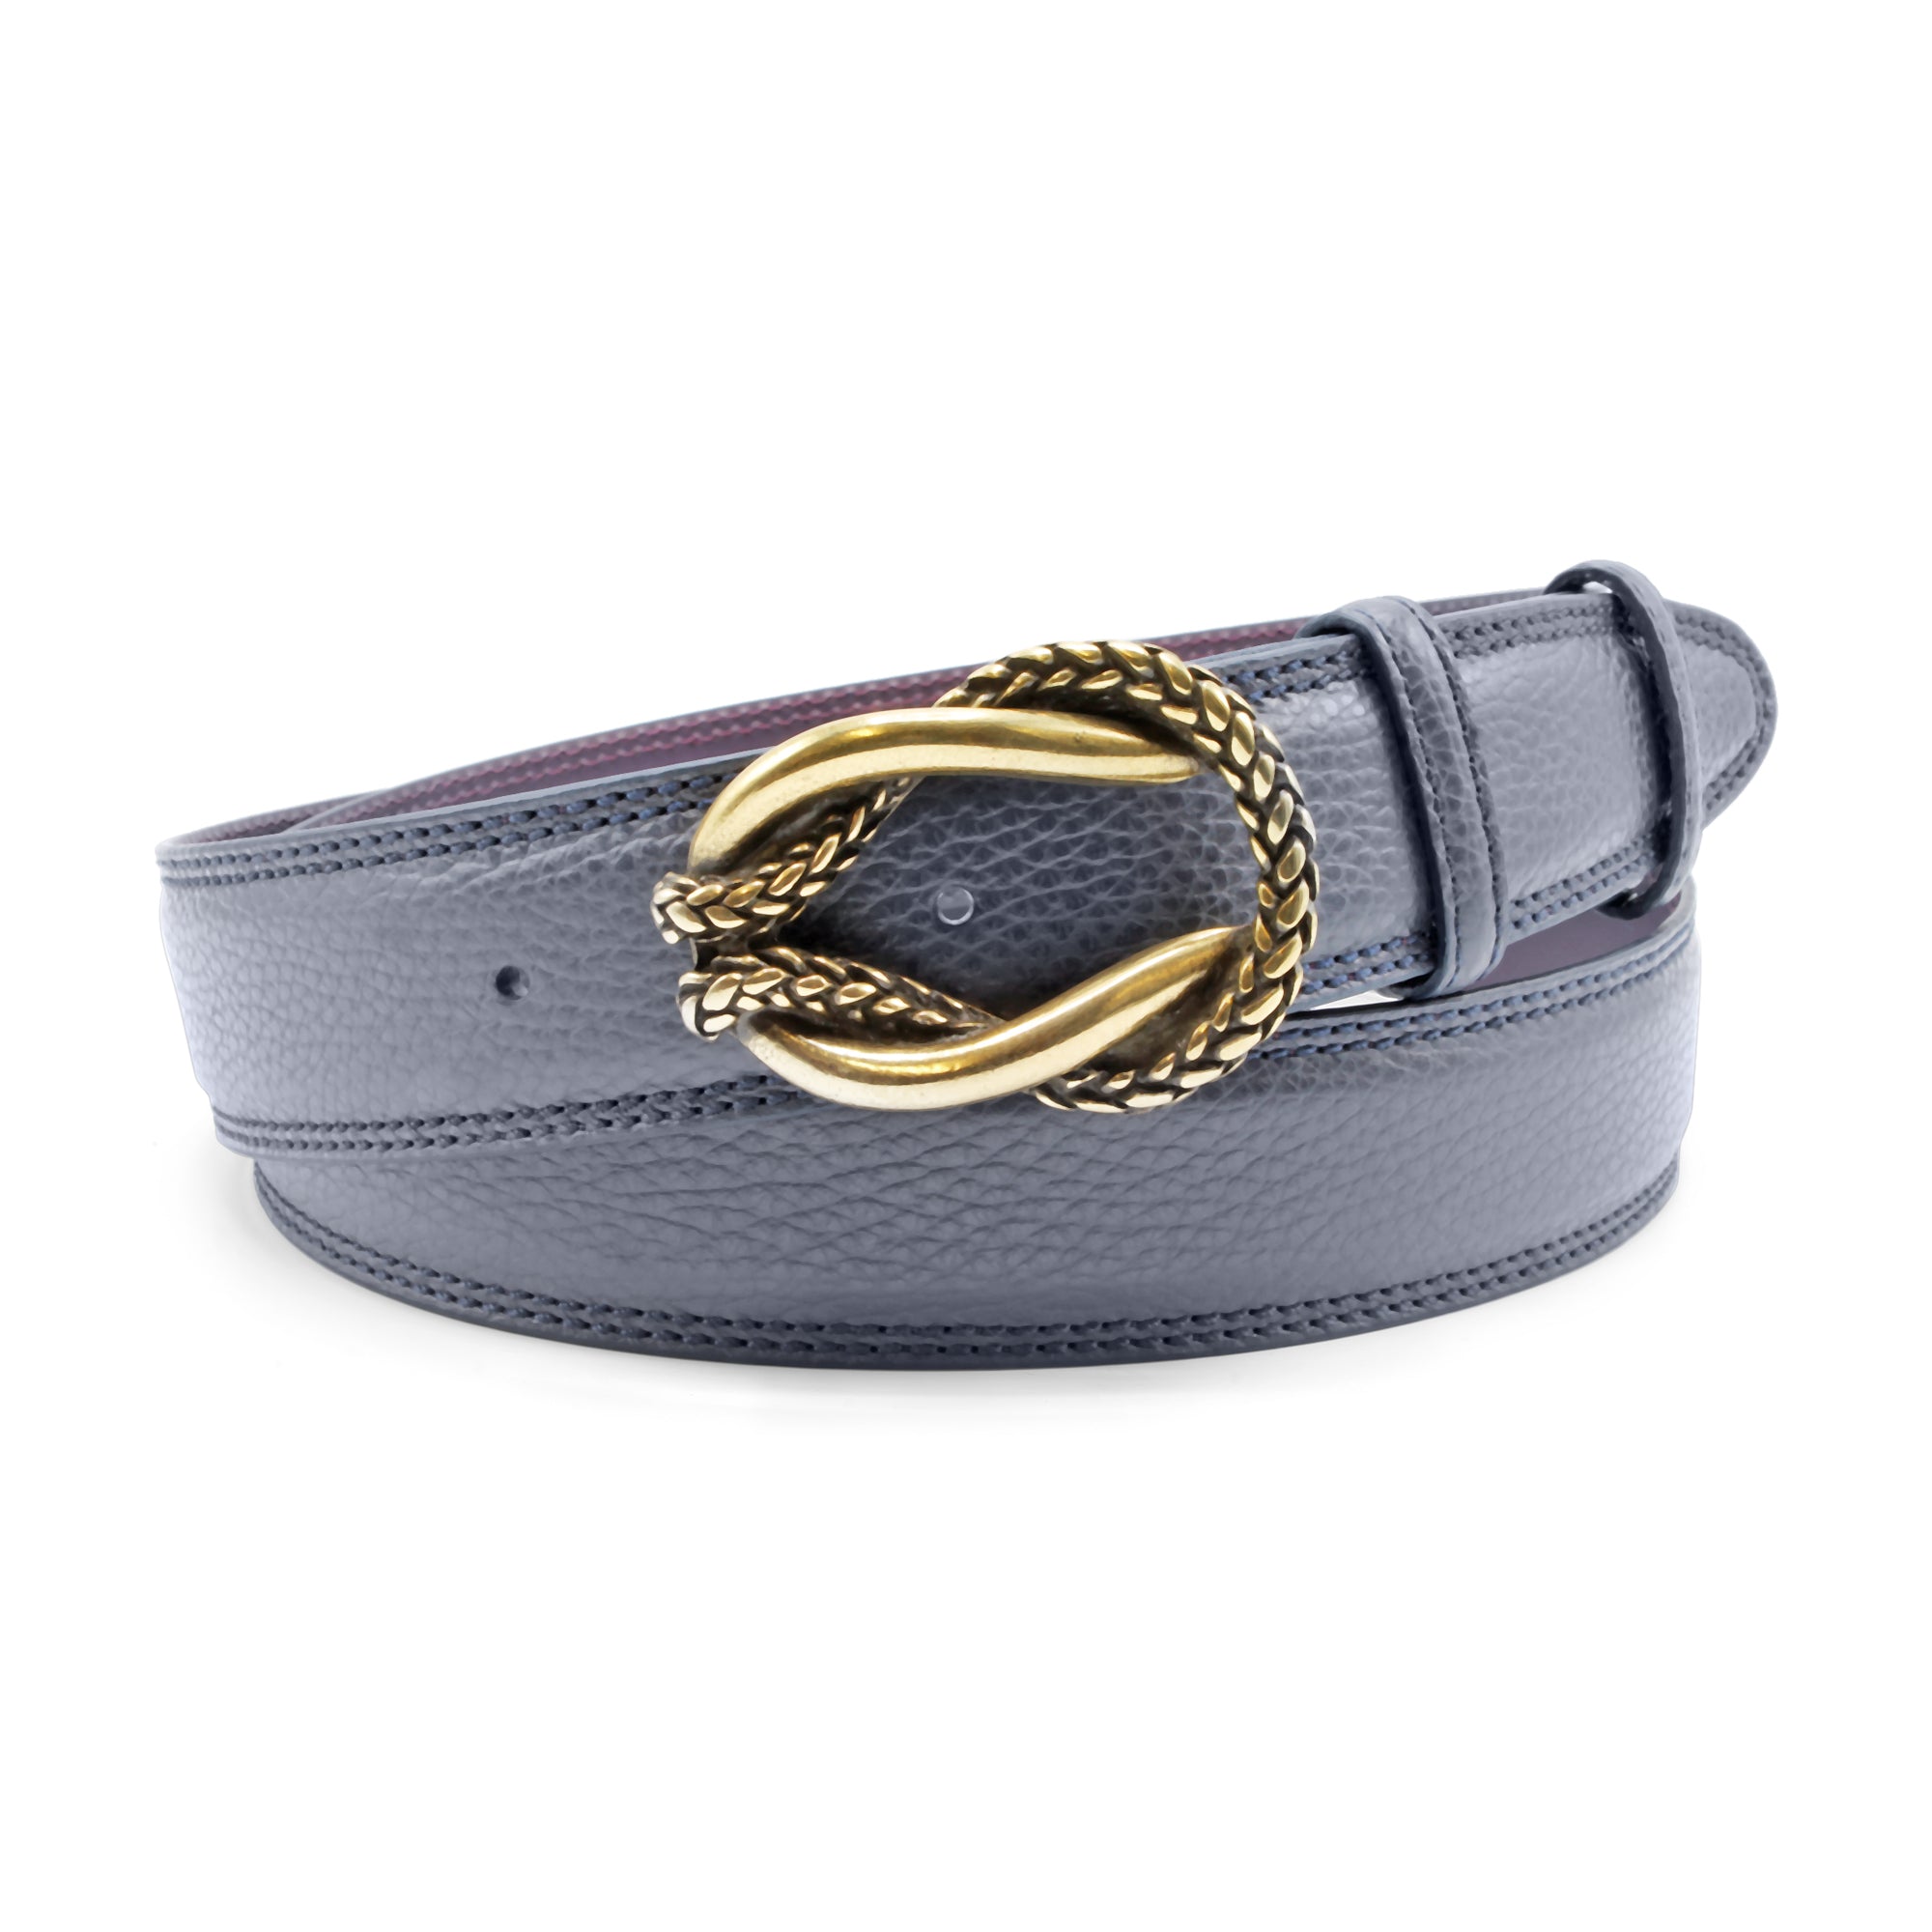 Luxurious handcrafted Belts, Buckles & Accessories since 2004.